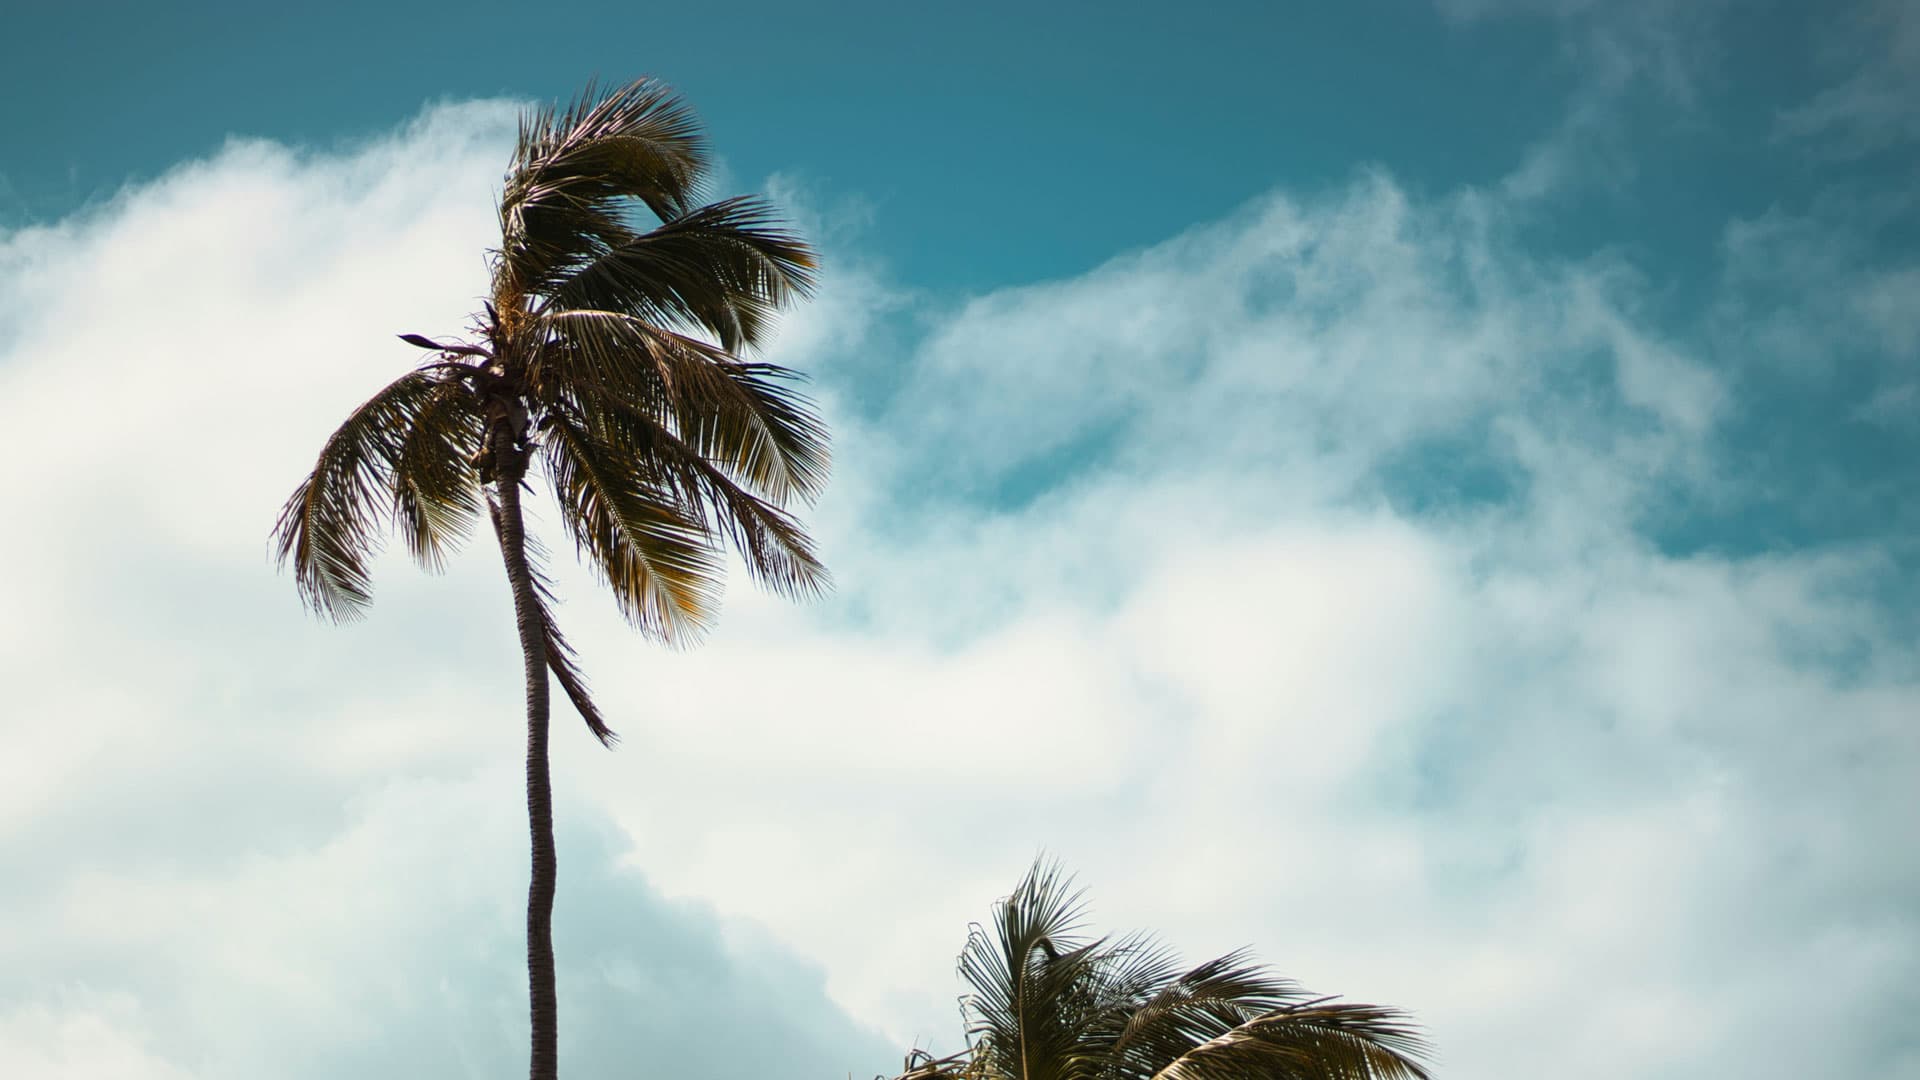 An elegant palm tree stands tall against a backdrop of azure skies. Its fronds, gently tousled by the breeze, create a delicate silhouette. Wispy clouds meander, adding a dreamy dimension, painting a scene of tropical serenity and vastness.